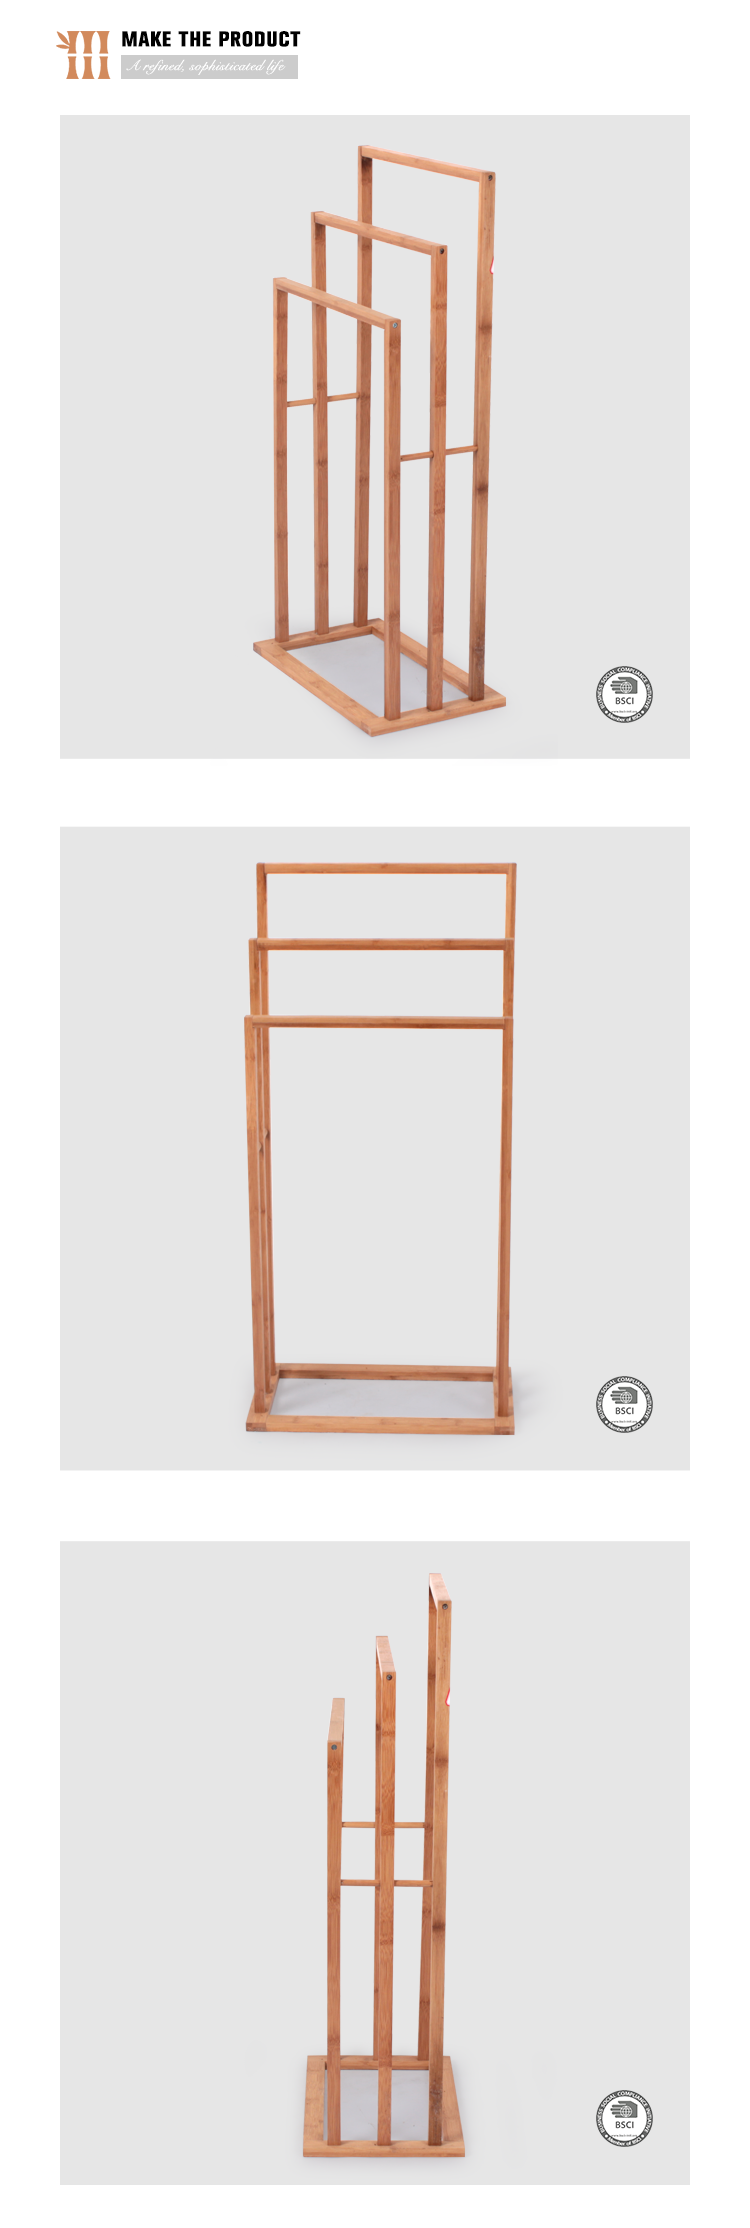 2019 new design modern clothes rack multifunction bamboo wooden clothes display rack custom wood hangers